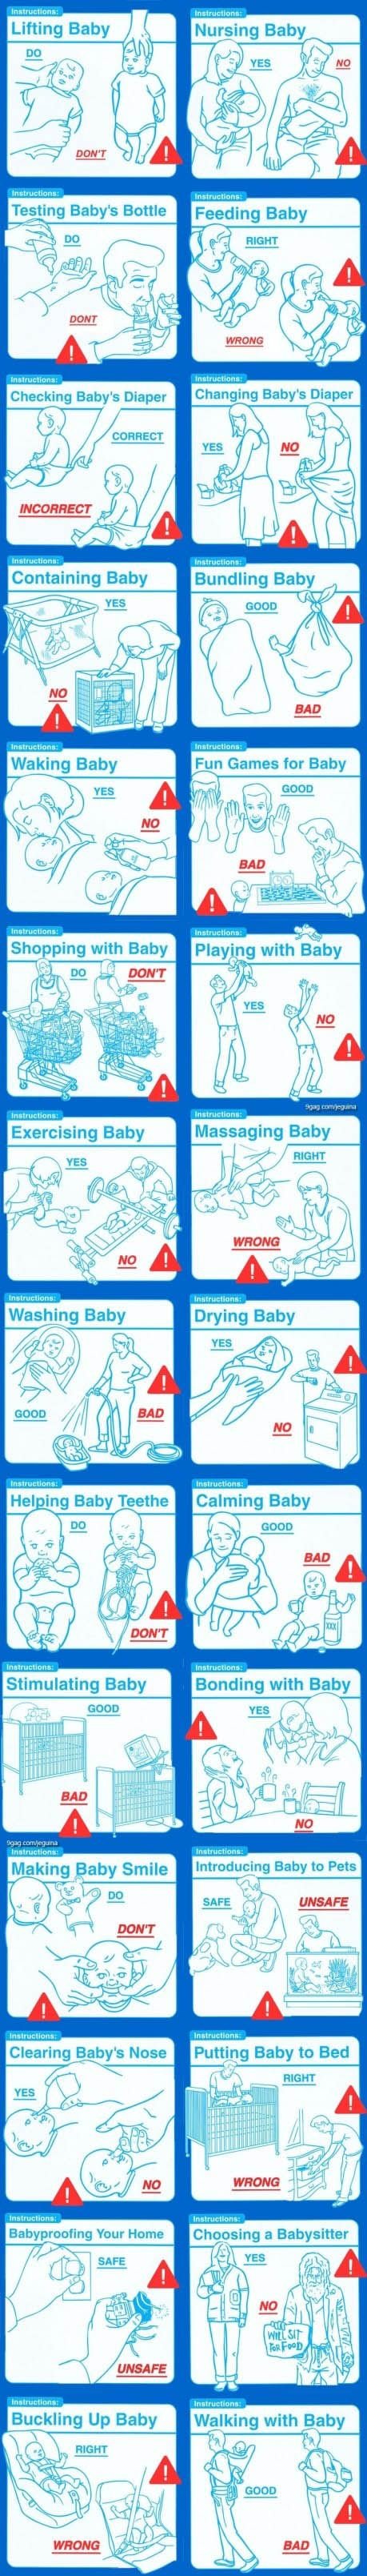 How to Care For Your New Baby. found this online and was laughing my ass off Just wanted to share with you guys Hope you enjoy it!. Lifting Baby M q scl INF In 